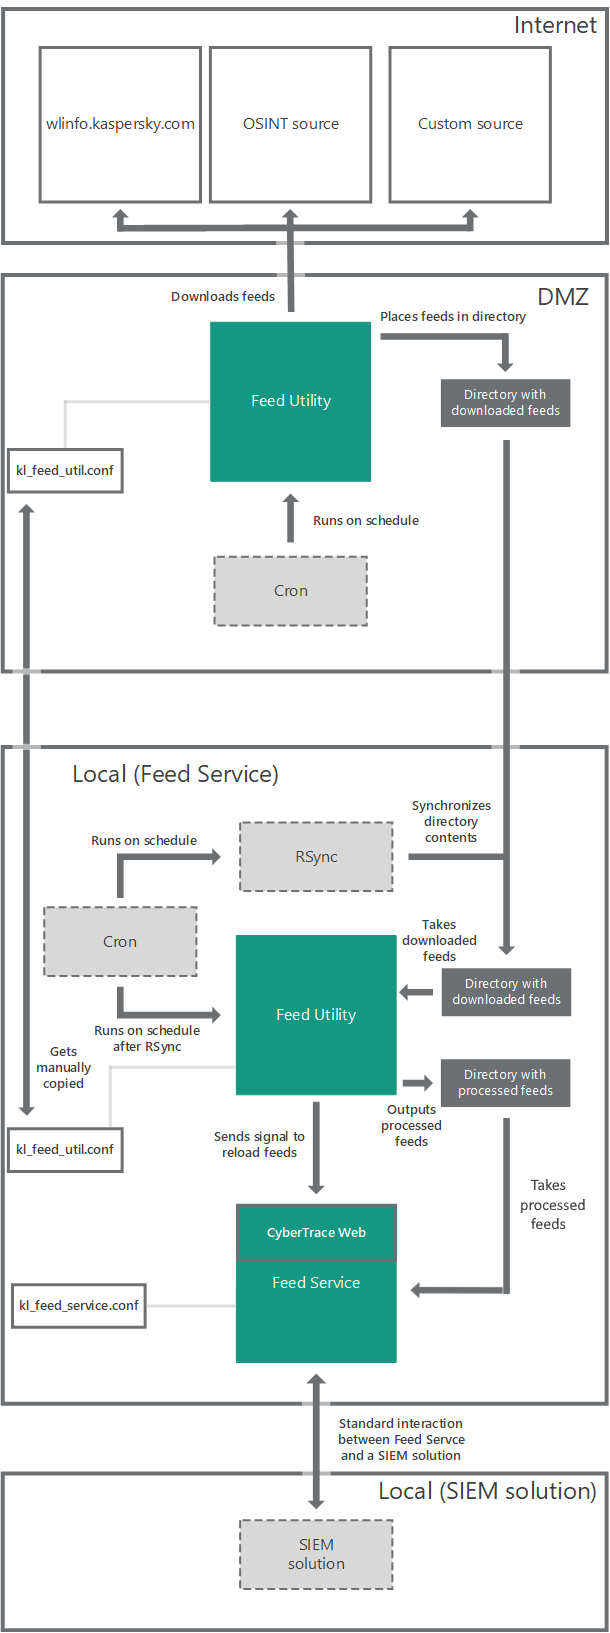 Diagram of workflow when Feed Service and Feed Utility are installed on separate computers.